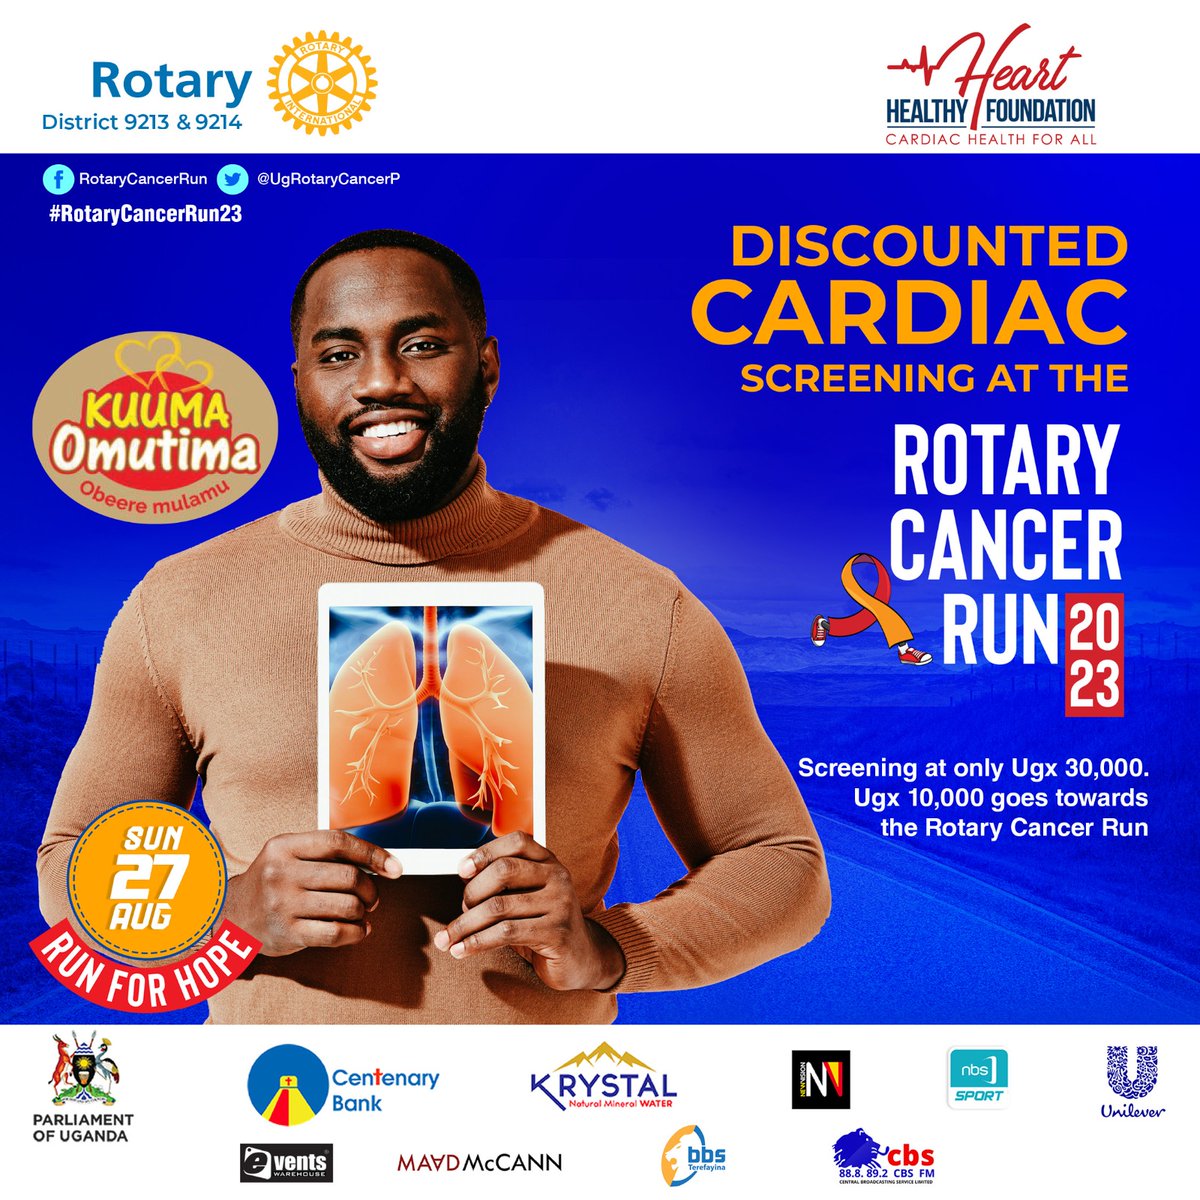 Know your number and reduce your risk of getting #heartdiseases or stroke.

Join us on Sunday 27th August 2023 at Kololo Airstrip during the #RotaryCancerRun23 as millions of Ugandans run for a cause and get a discounted cardiac screening check up.